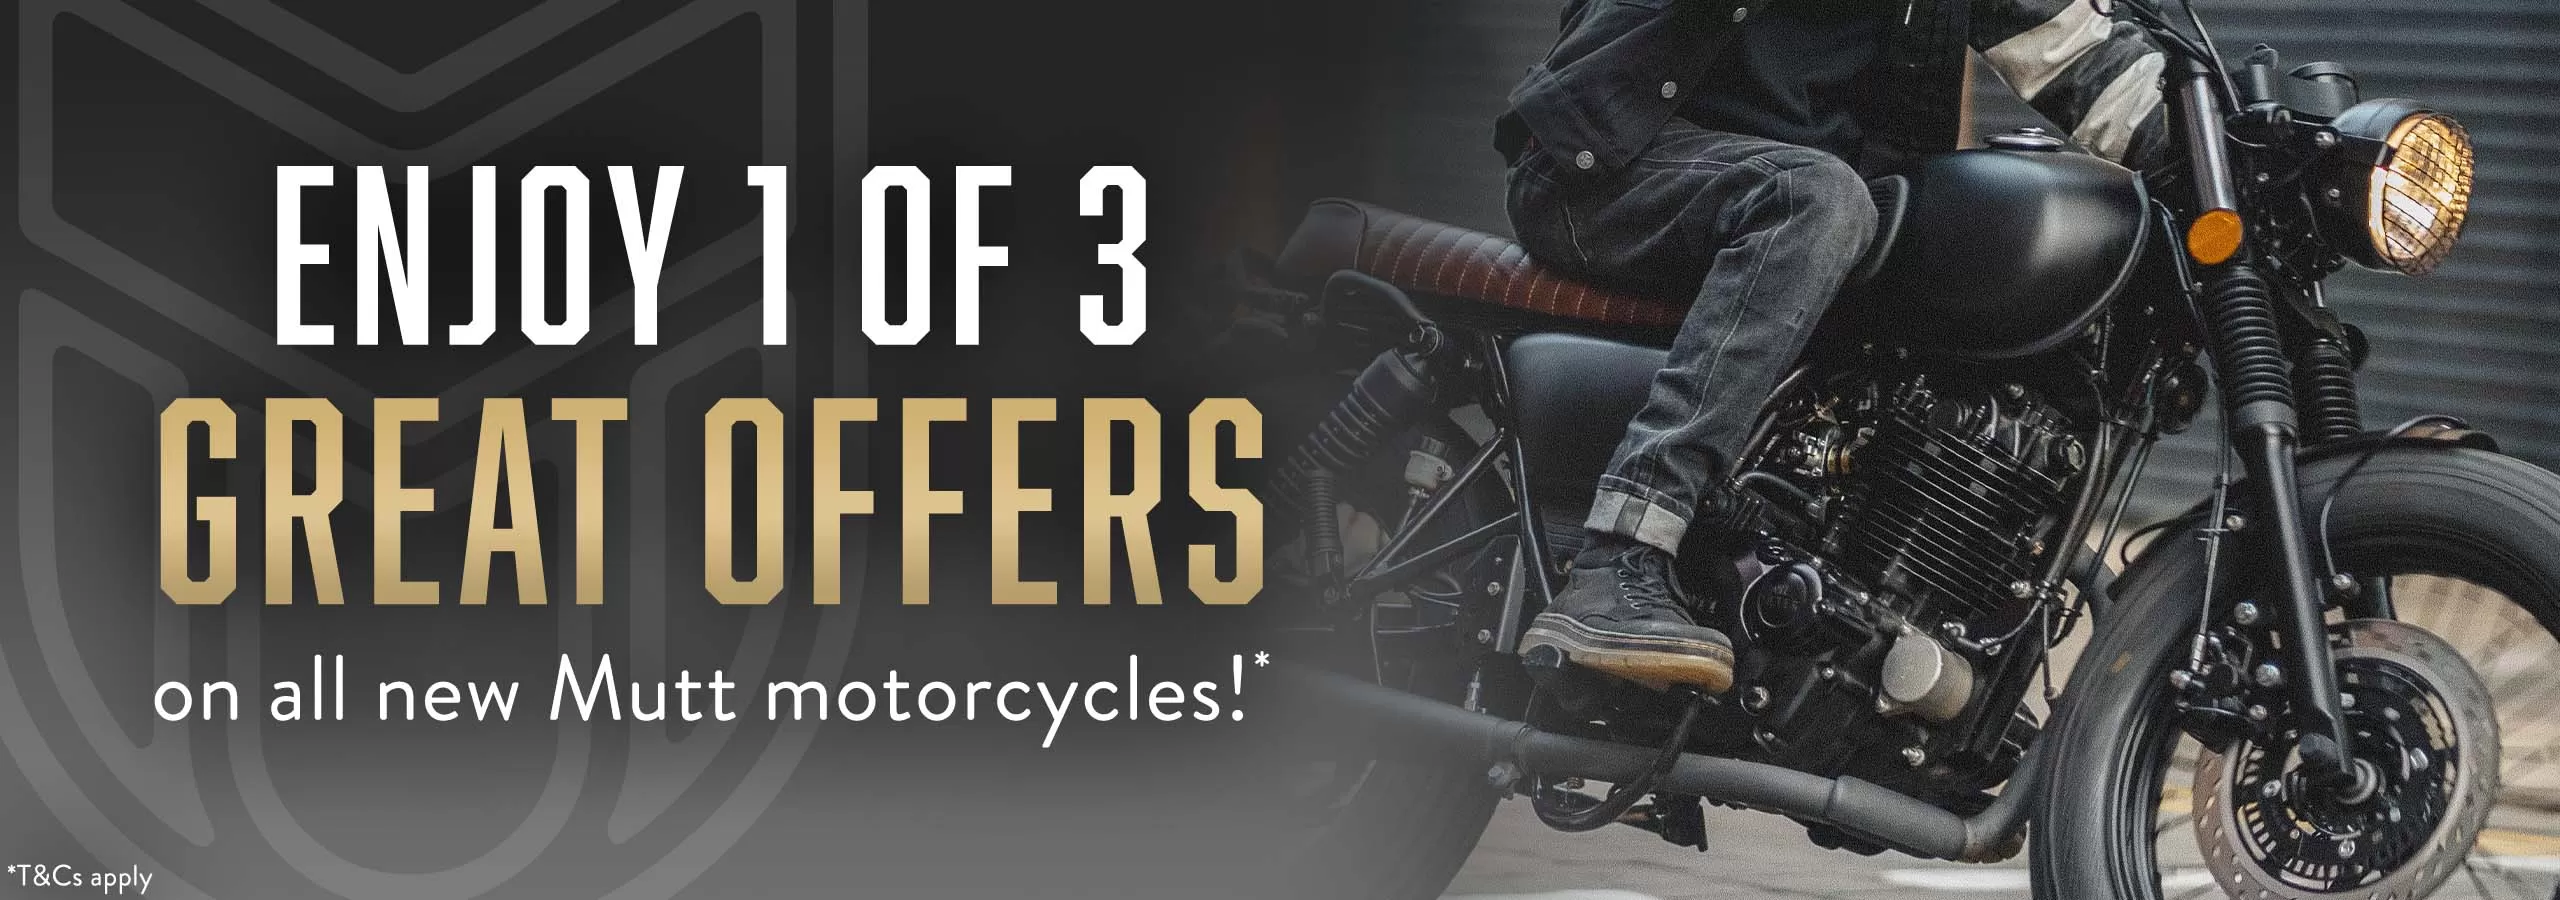 Enjoy 1 of 3 great options in this new offer on all Mutt Motorcycles at Laguna Motorcycles in Maidstone